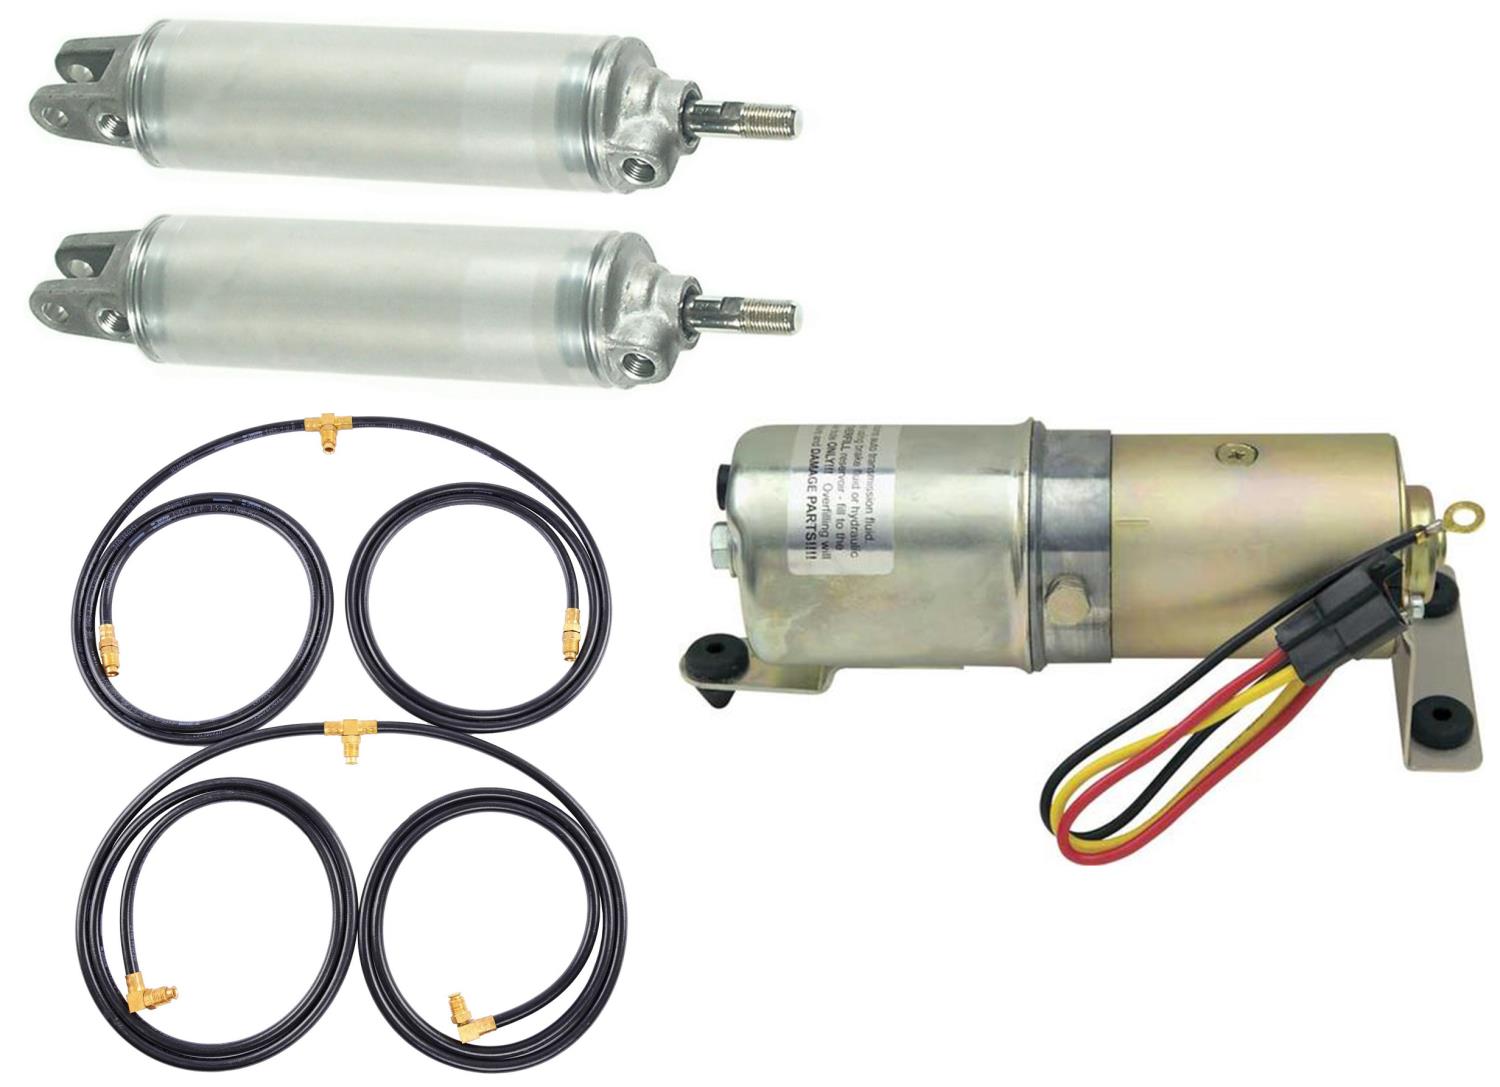 Convertible Top Cylinder, Motor & Hose Kit for 1956-1961 Chevrolet Corvette Convertibles [Sold as a Kit]